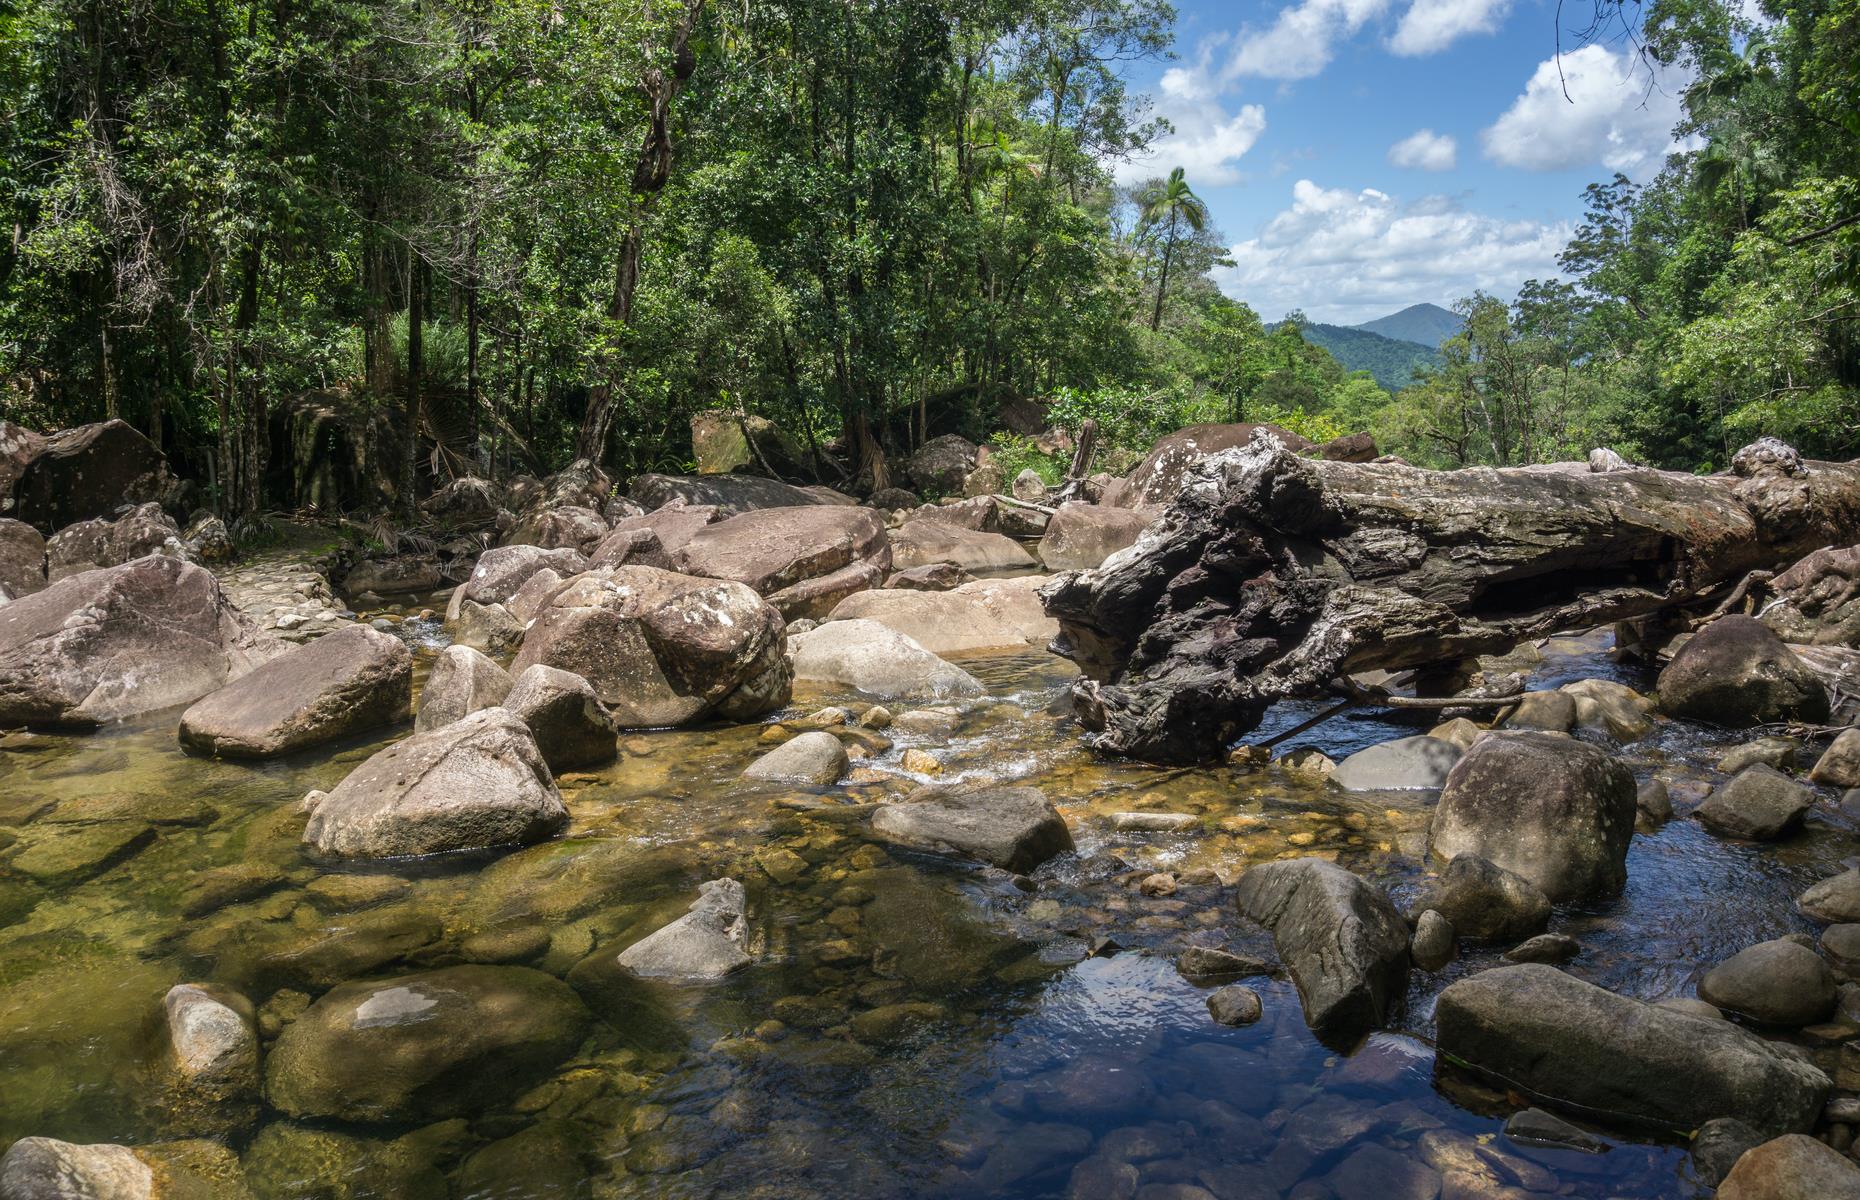 <p>The duckbilled platypus has to be one of Australia’s most intriguing creatures, as well as its most elusive – but you can make tracks to mountainous <a href="https://parks.des.qld.gov.au/parks/eungella">Eungella National Park</a> to seek them out. Free to enter, this stunning forested wilderness in Queensland's Mackay Area is one of the best places to spy these amazing animals in the wild. Head to the Broken River area, where you’ll find designated platypus-viewing platforms along a boardwalk that follows the edge of the creek. Stay super quiet and go at dawn or dusk to be in with the best chance of spying them.</p>